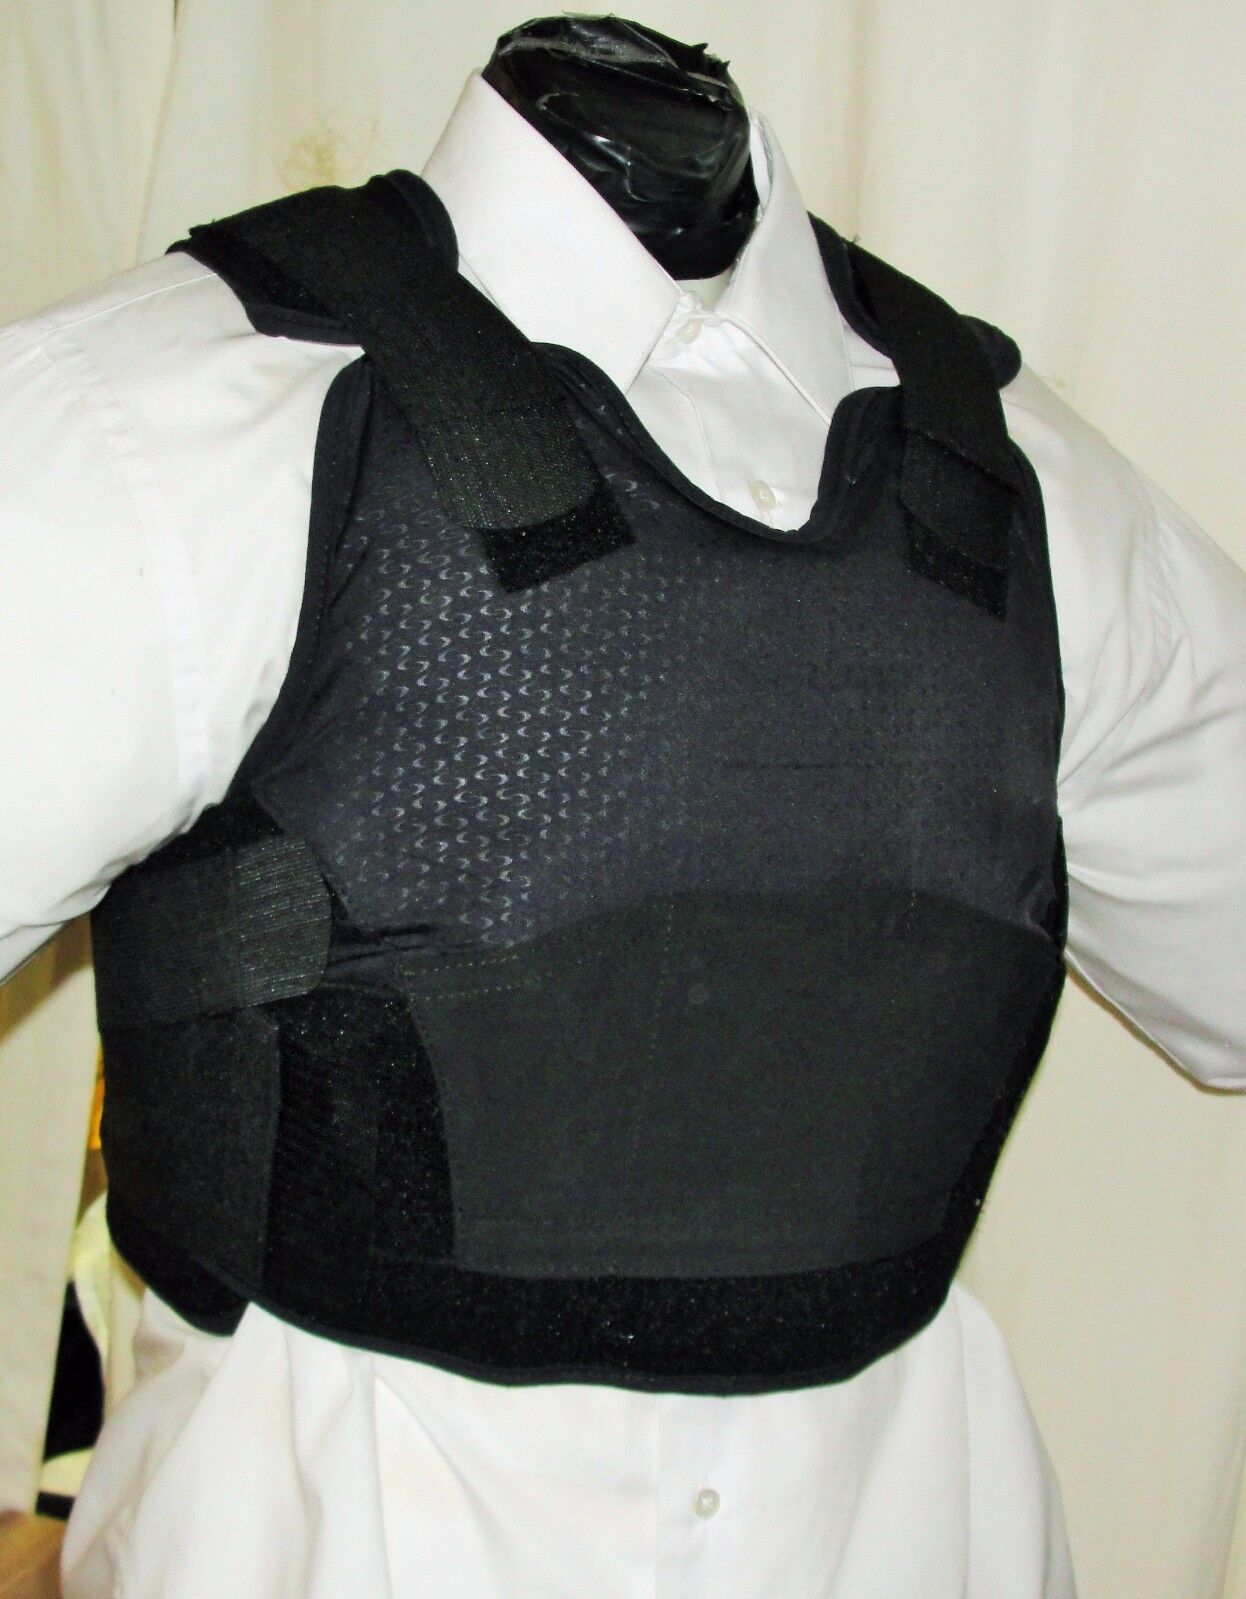 Small Female IIIA BulletProof Concealable Body Armor Carrier Vest with Inserts